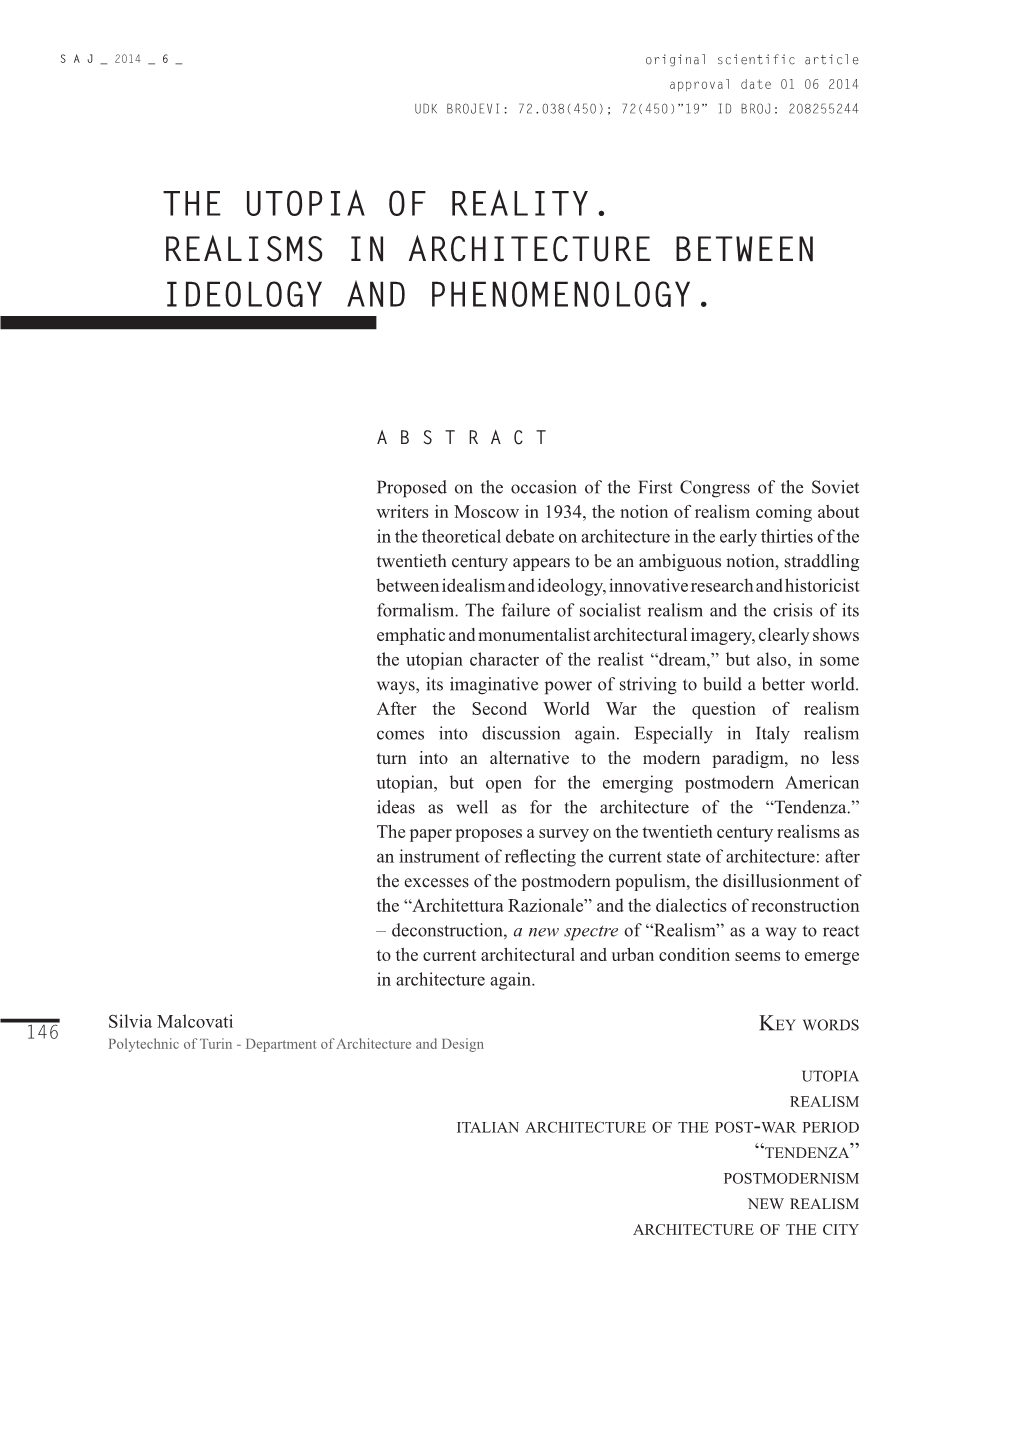 The Utopia of Reality. Realisms in Architecture Between Ideology and Phenomenology